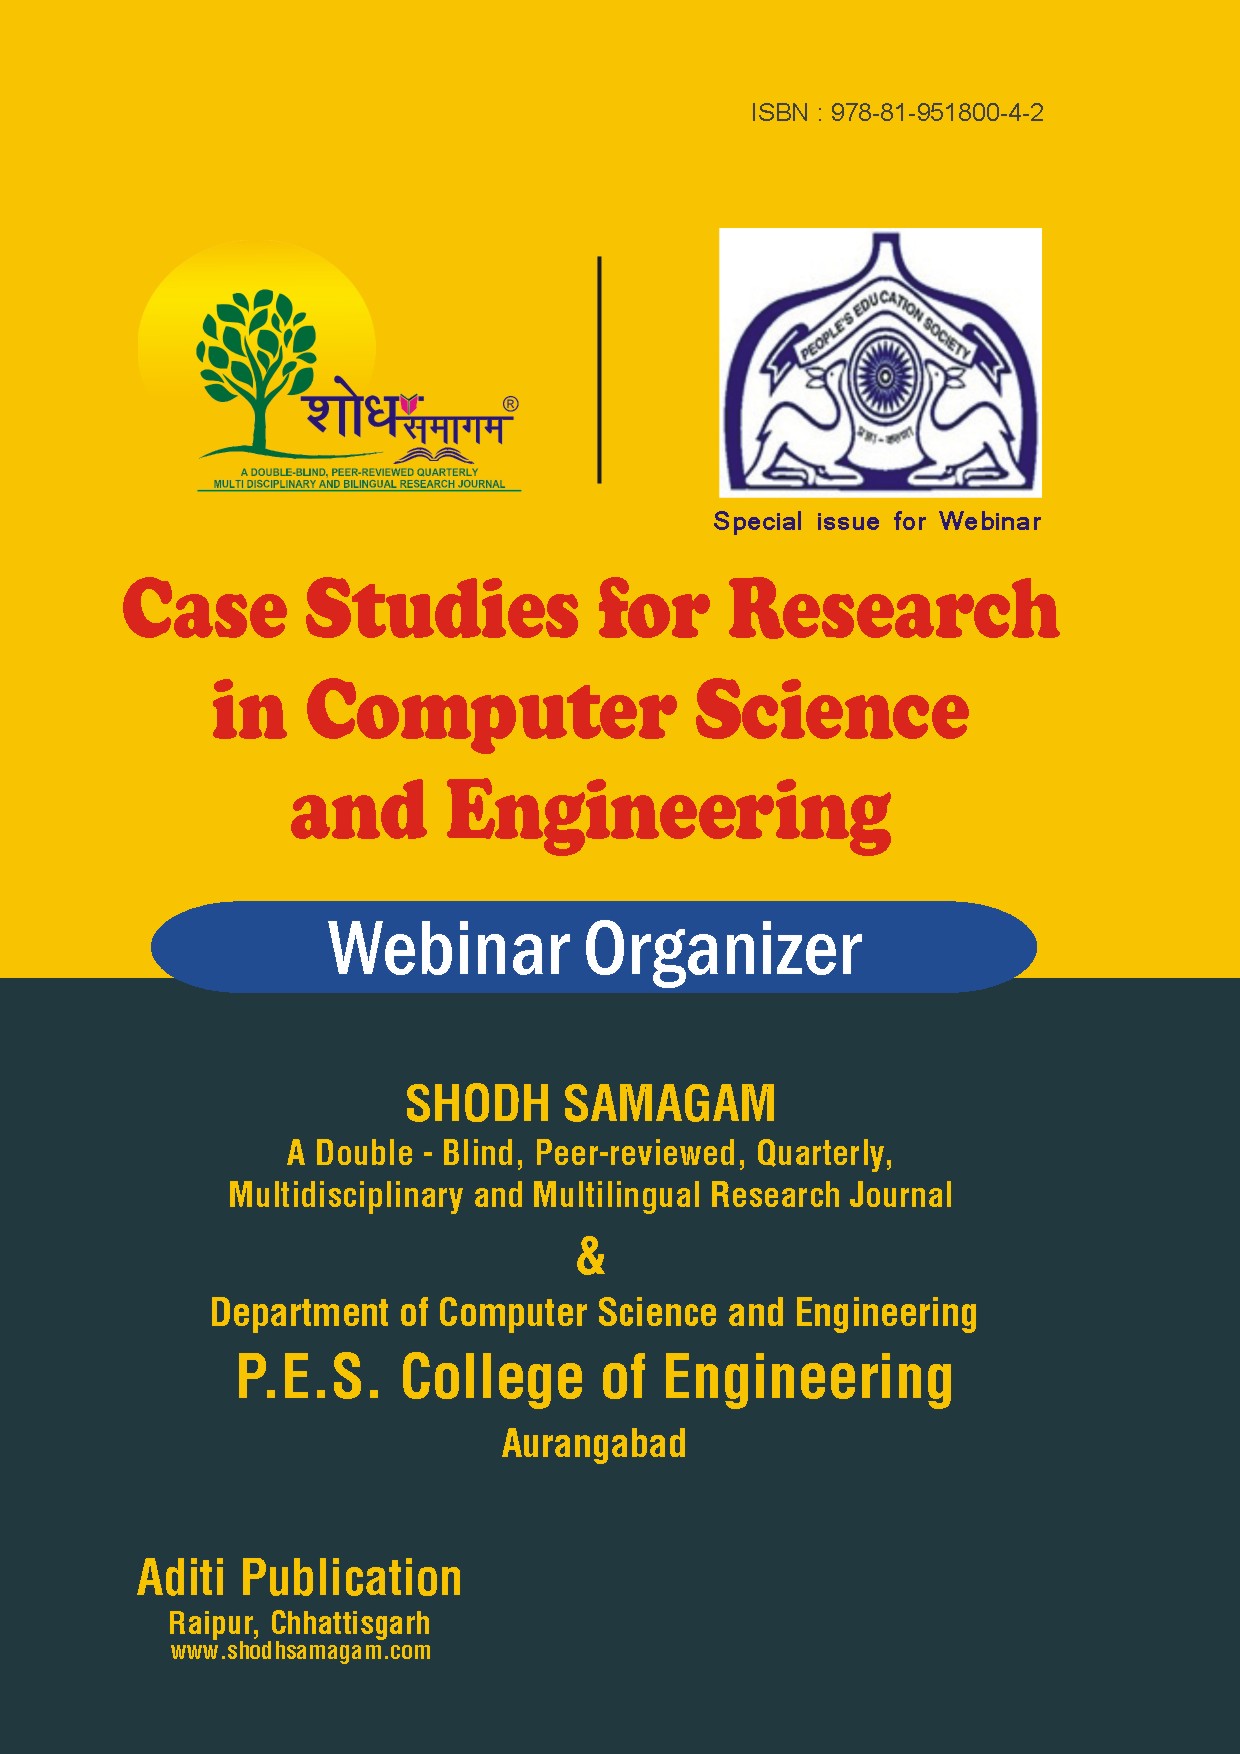 Webinar issue of P.E.S College of Engineering